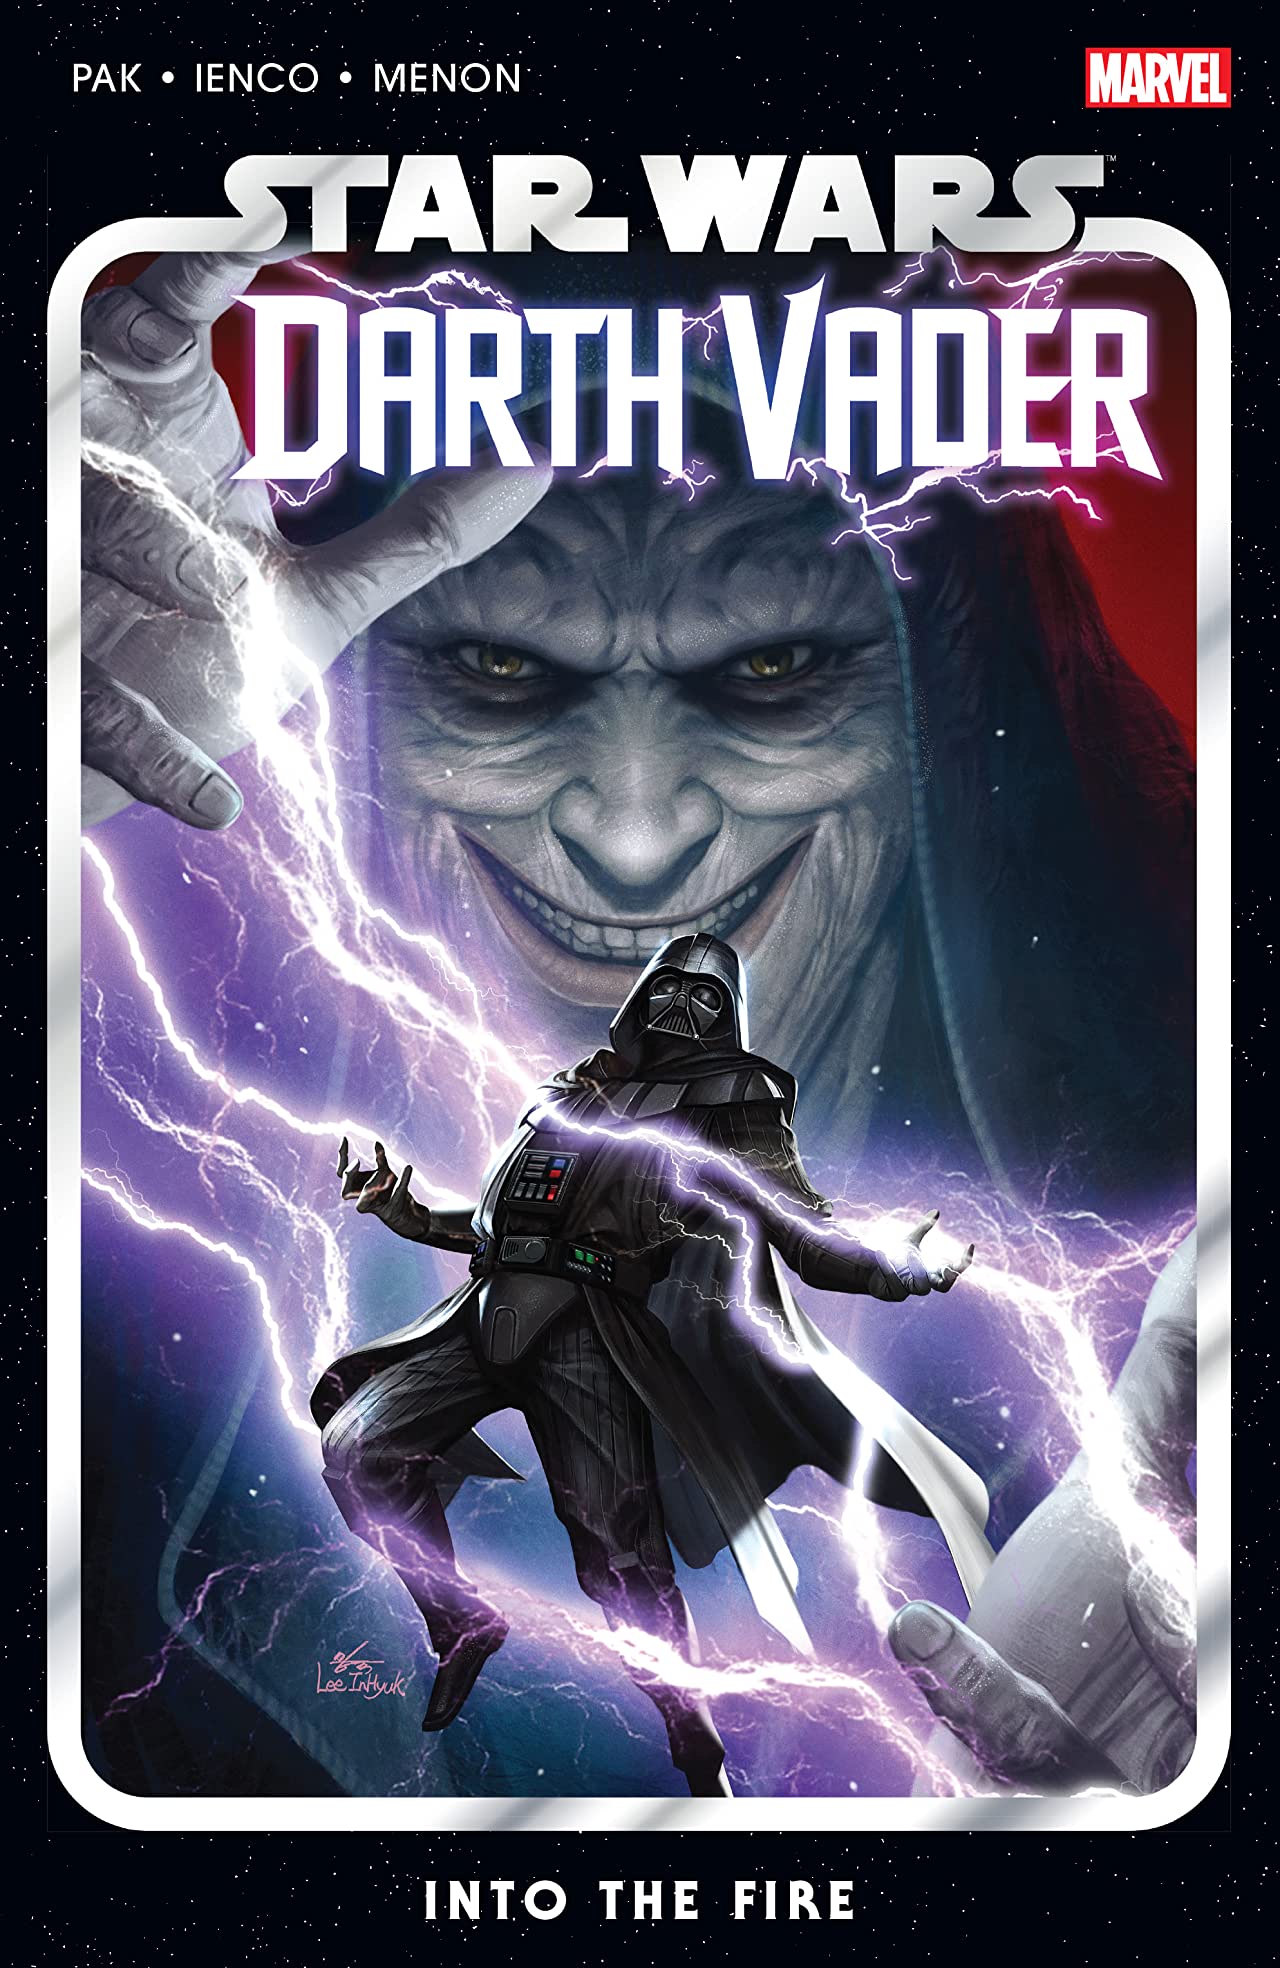 Star Wars: Darth Vader By Greg Pak Vol. 2 - Into The Fire (Trade Paperback)